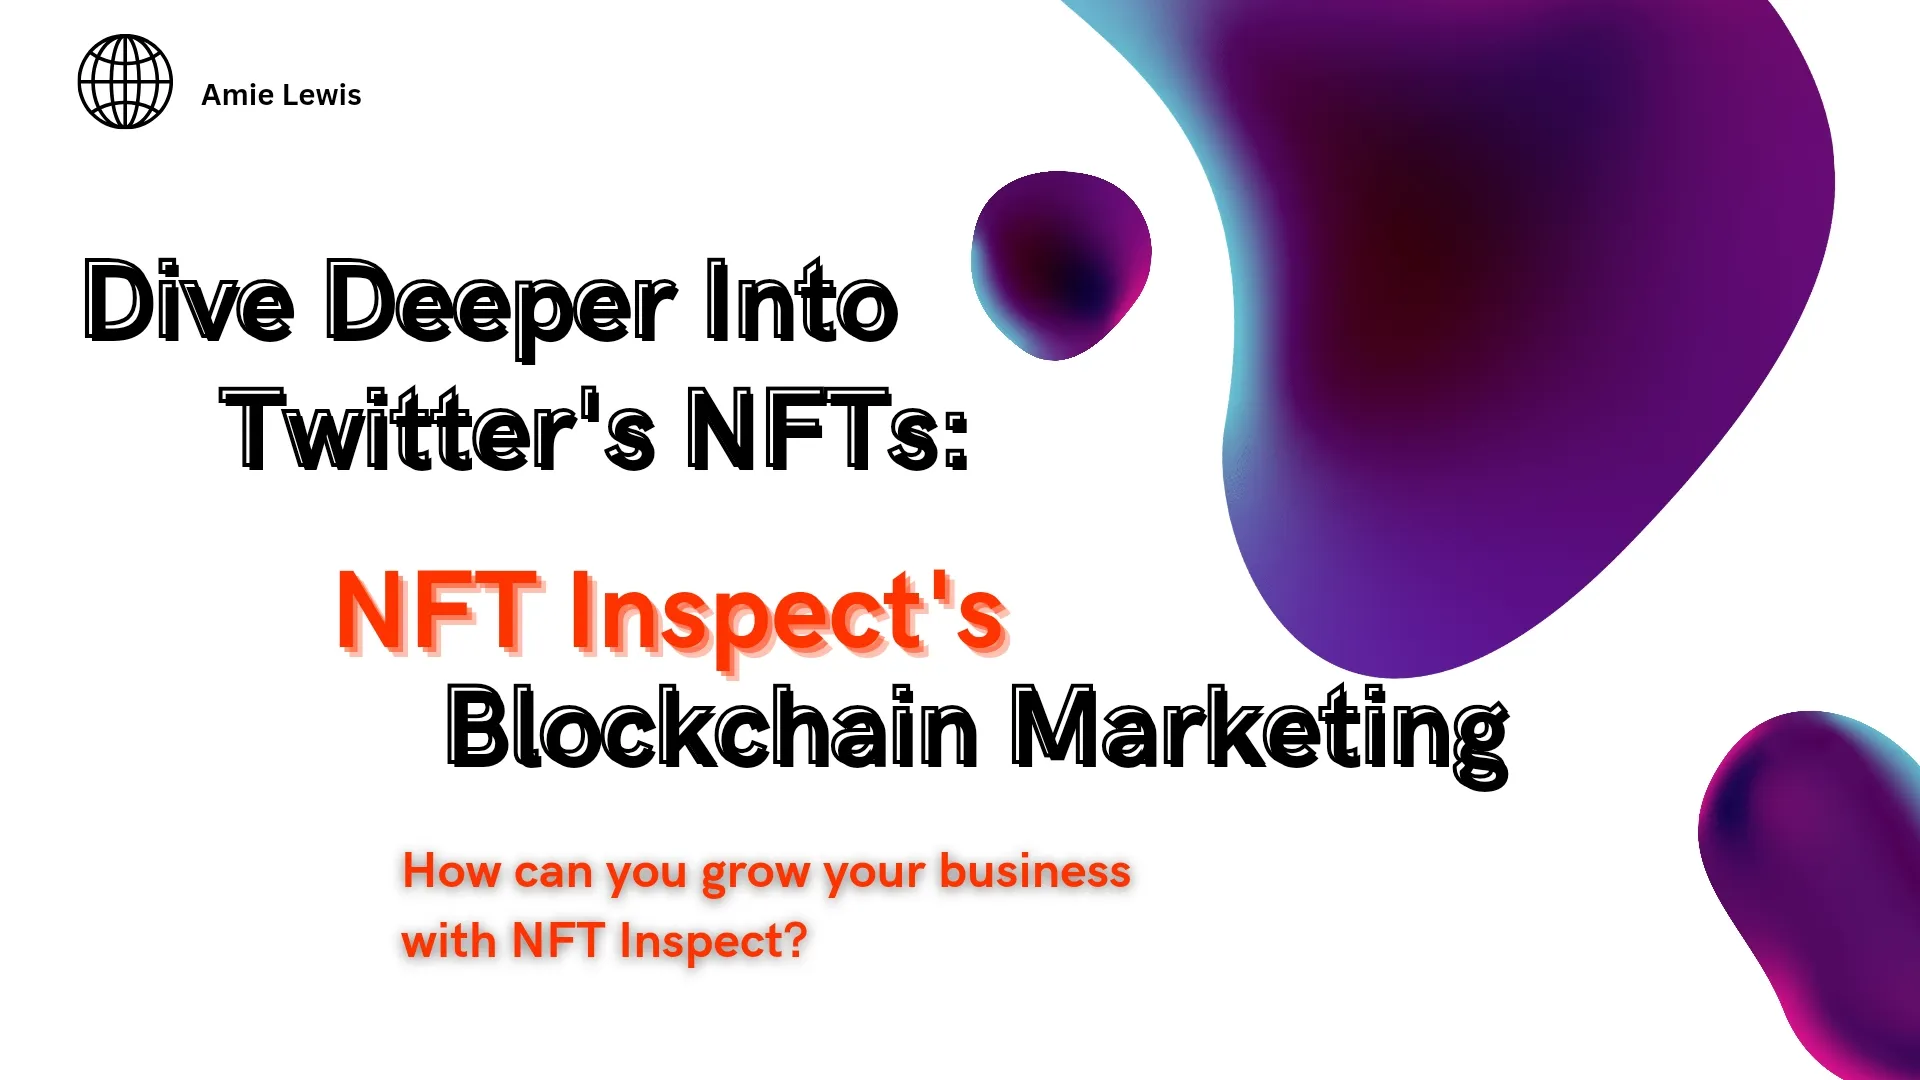 Want to know a FREE way to conduct market research? 

This reveals exact individuals, so no figurative personas.

Market research is essential for products and  services. Failure to conduct market research, oftentimes, results in products and services that lack product market fit, have Little to no demand, and don't solve a problem. 

Meet NFT Inspect! This is a free Chrome extension that identifies over 16 million NFTs and their owners, communities, top buyers, and top influences via Twitter. 

If you would like to learn exactly how you can use this to conduct market research download the link below.

ccmyel2.sharing.bublup.com/ui/landing_page?item_id=005-wi-9d670793-65e5-46e4-9c42-eefd264b371e

Have you ever used nft inspect and if so what was your experience?